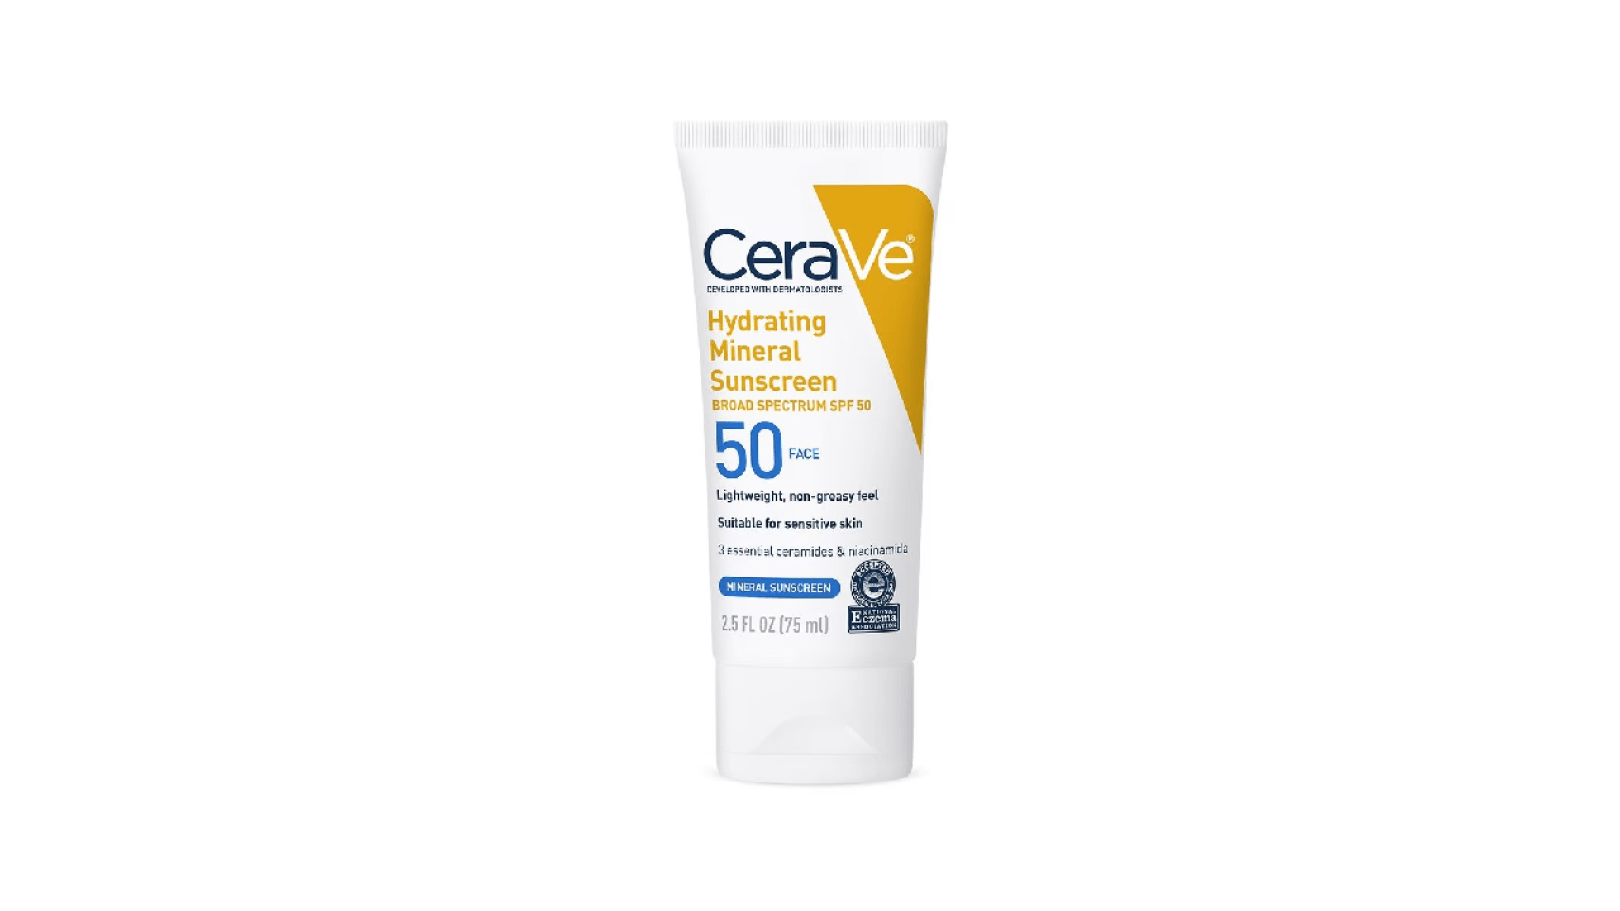 Hydrating 100% Mineral Face Sunscreen SPF 50